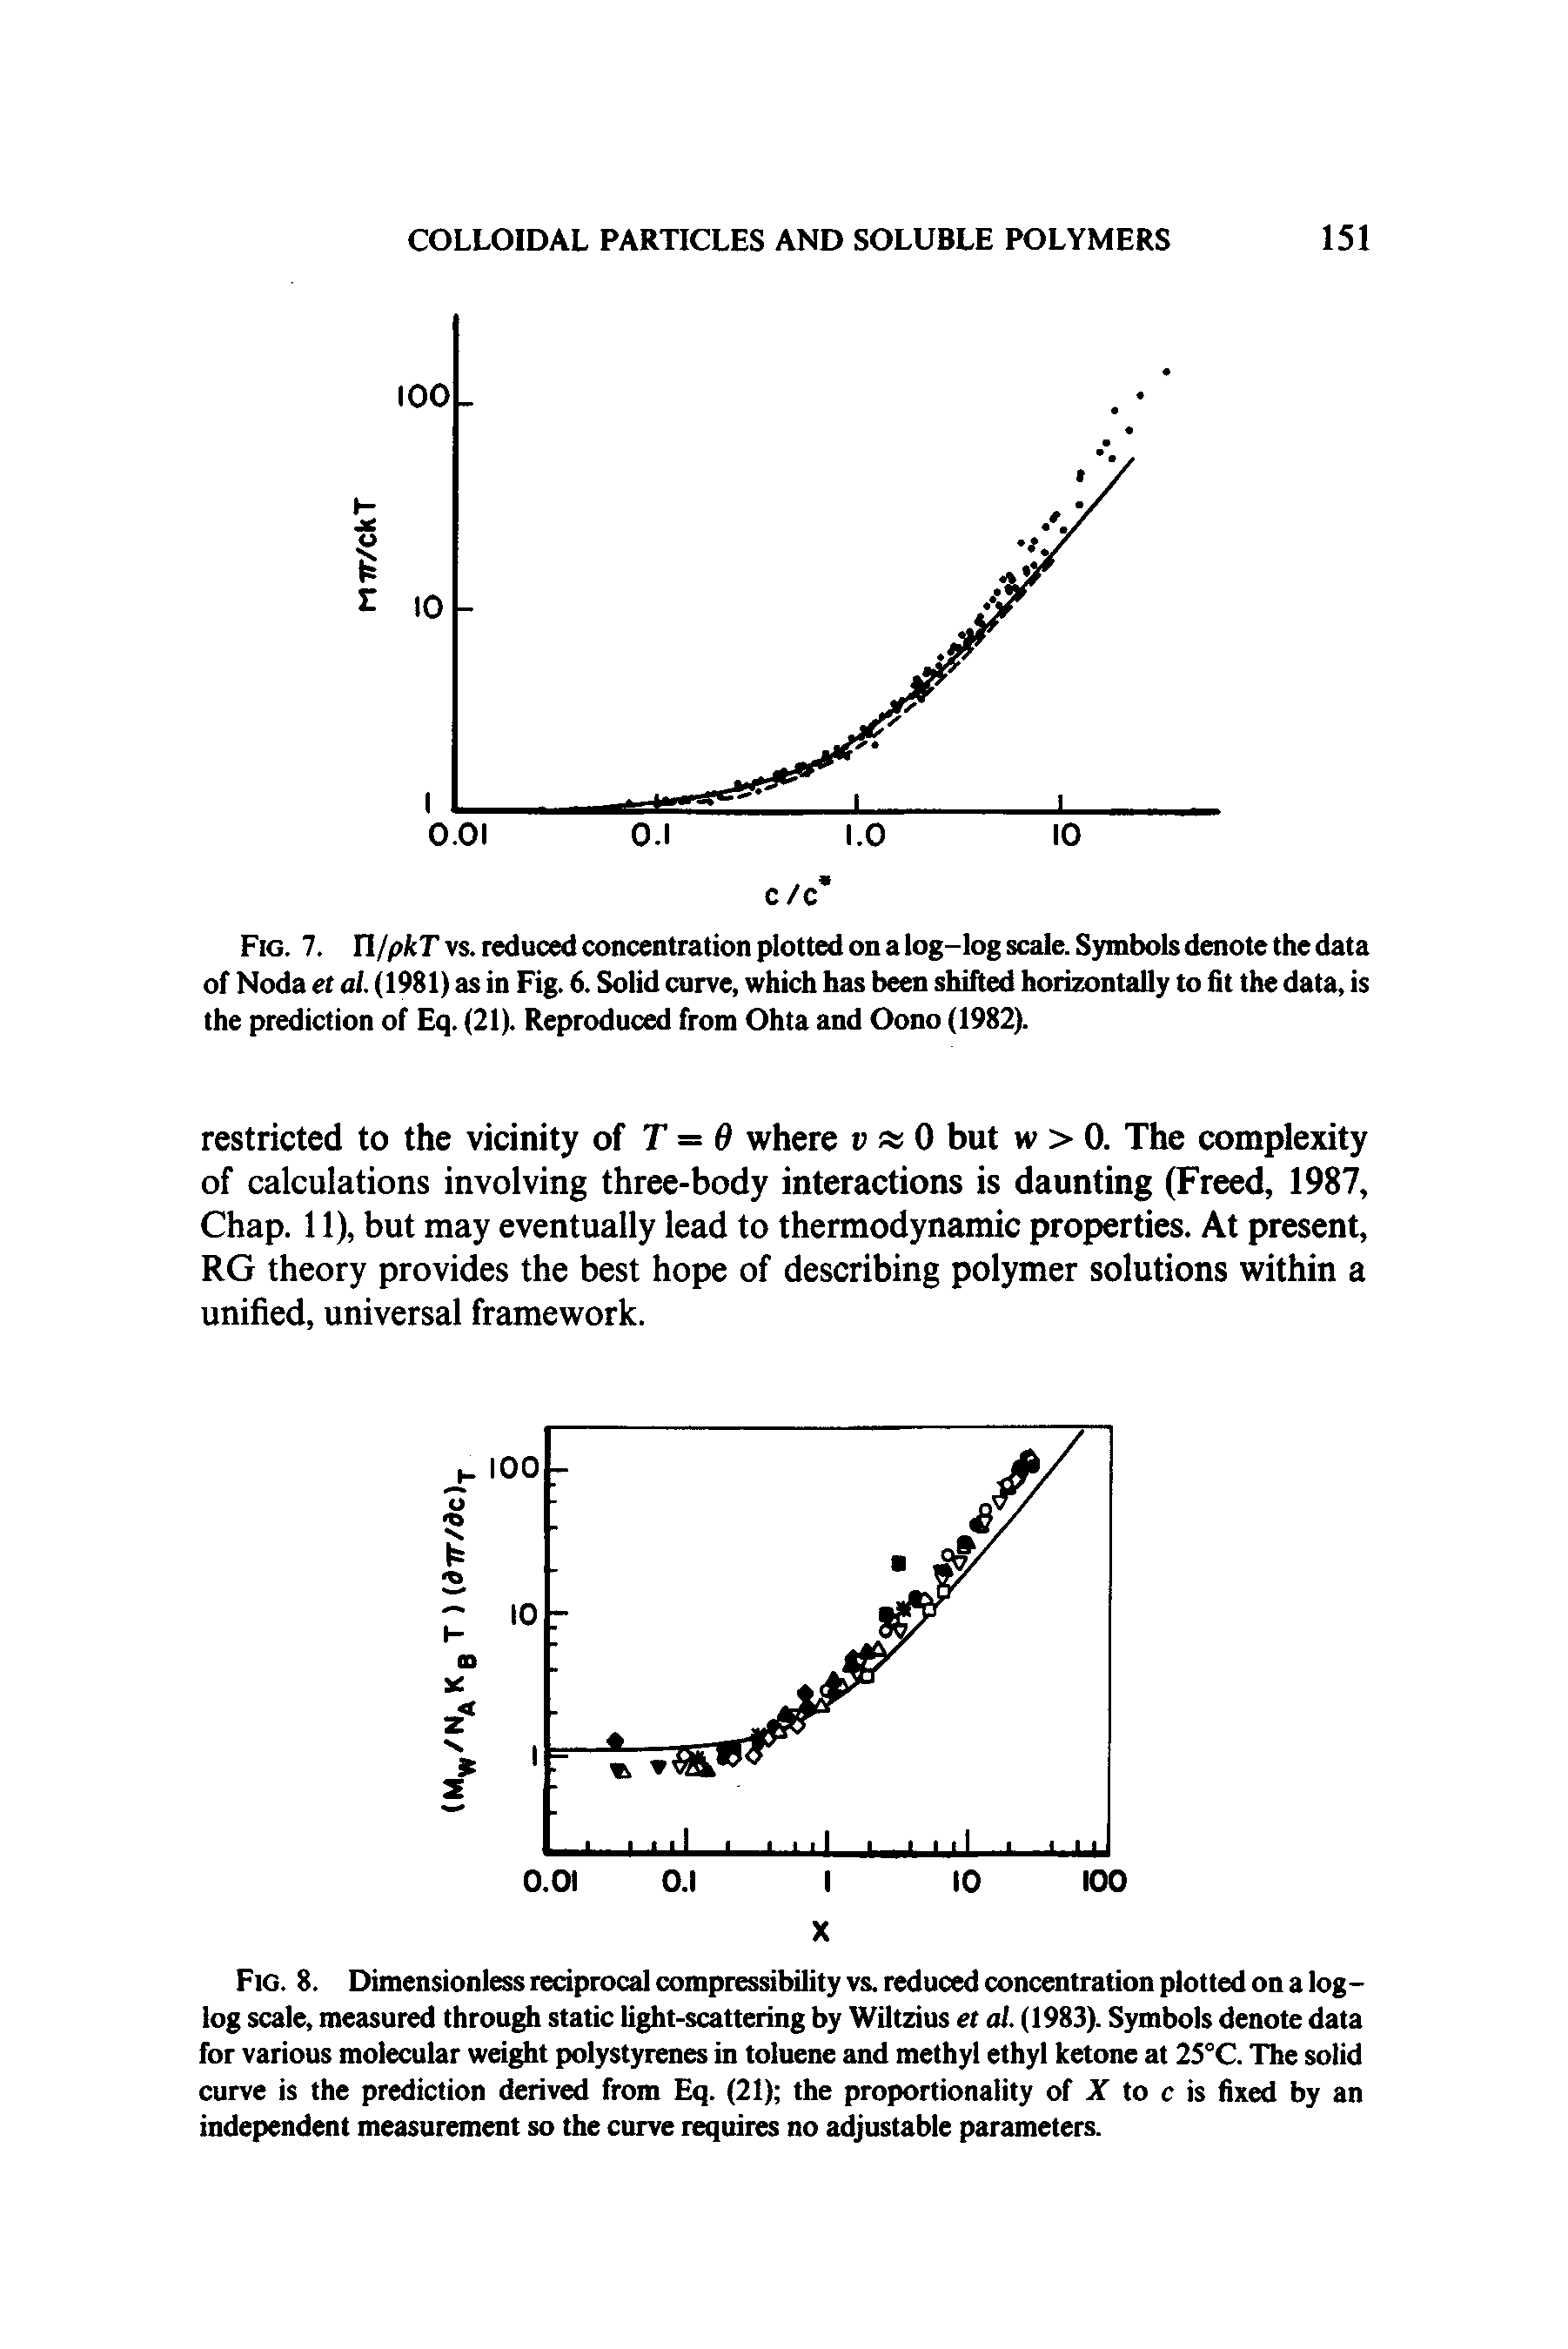 Fig. 8. Dimensionless reciprocal compressibility vs. reduced concentration plotted on a log-log scale, measured through static light-scattering by Wiltzius et al. (1983). Symbols denote data for various molecular weight polystyrenes in toluene and methyl ethyl ketone at 25°C. The solid curve is the prediction derived from Eq. (21) the proportionality of X to c is fixed by an independent measurement so the curve requires no adjustable parameters.